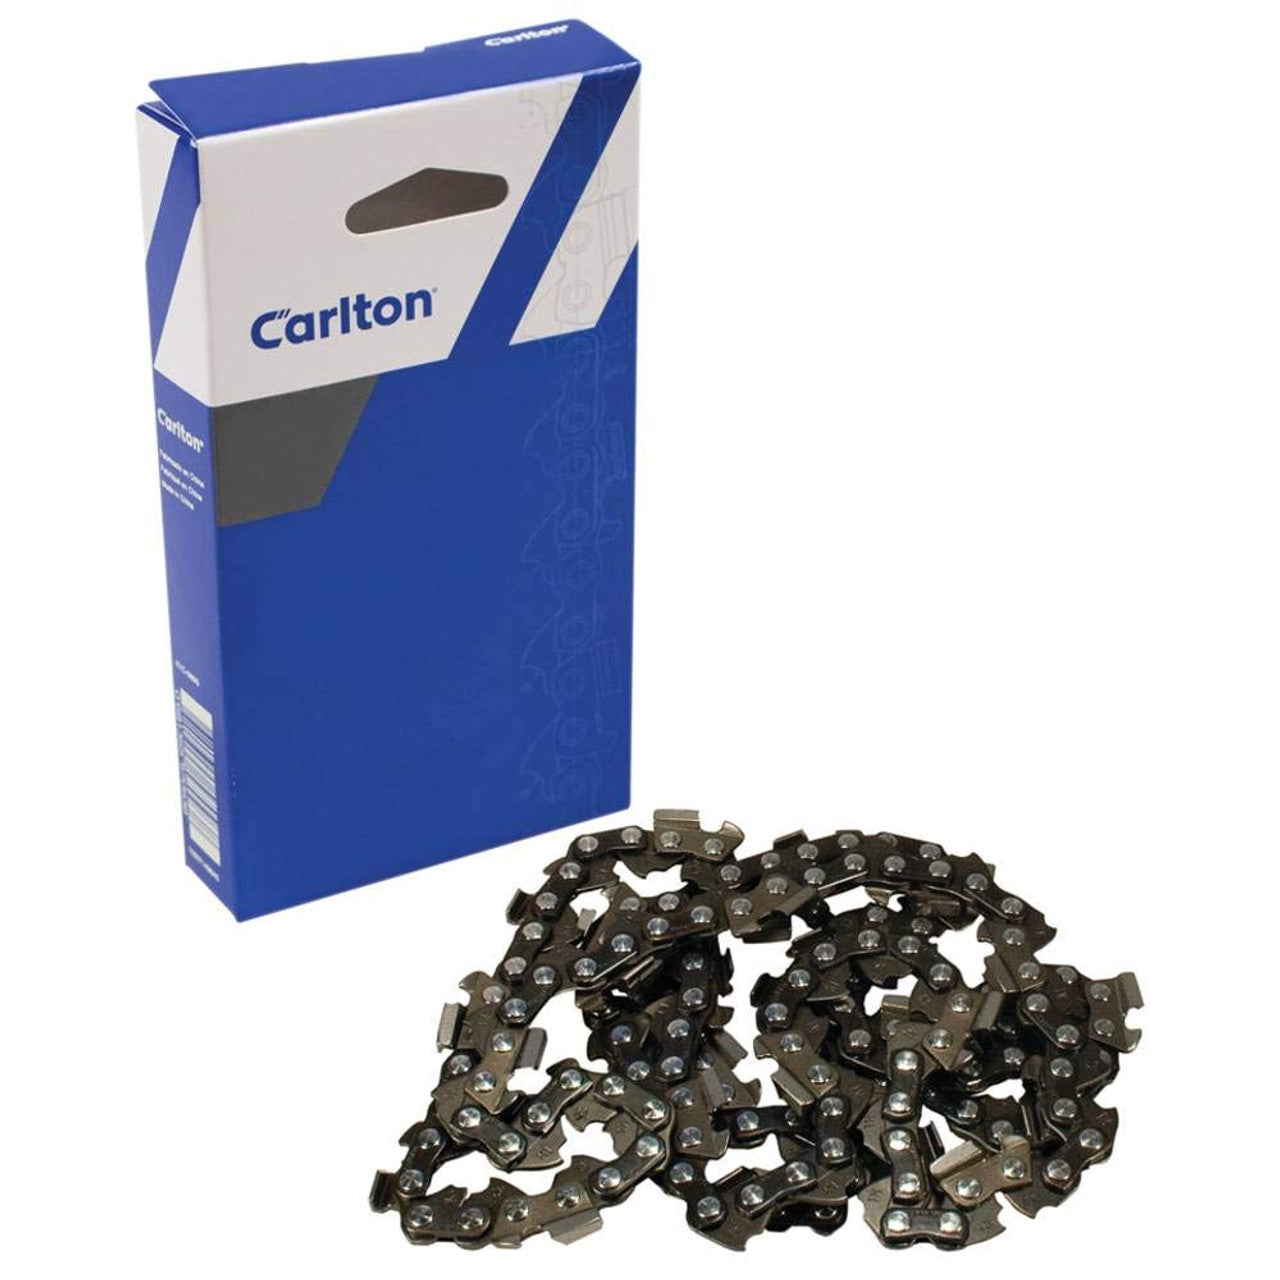 Carlton Full-Chisel .325" Pitch | .063 Gauge Chain Saw Chain Loop - Non-Safety